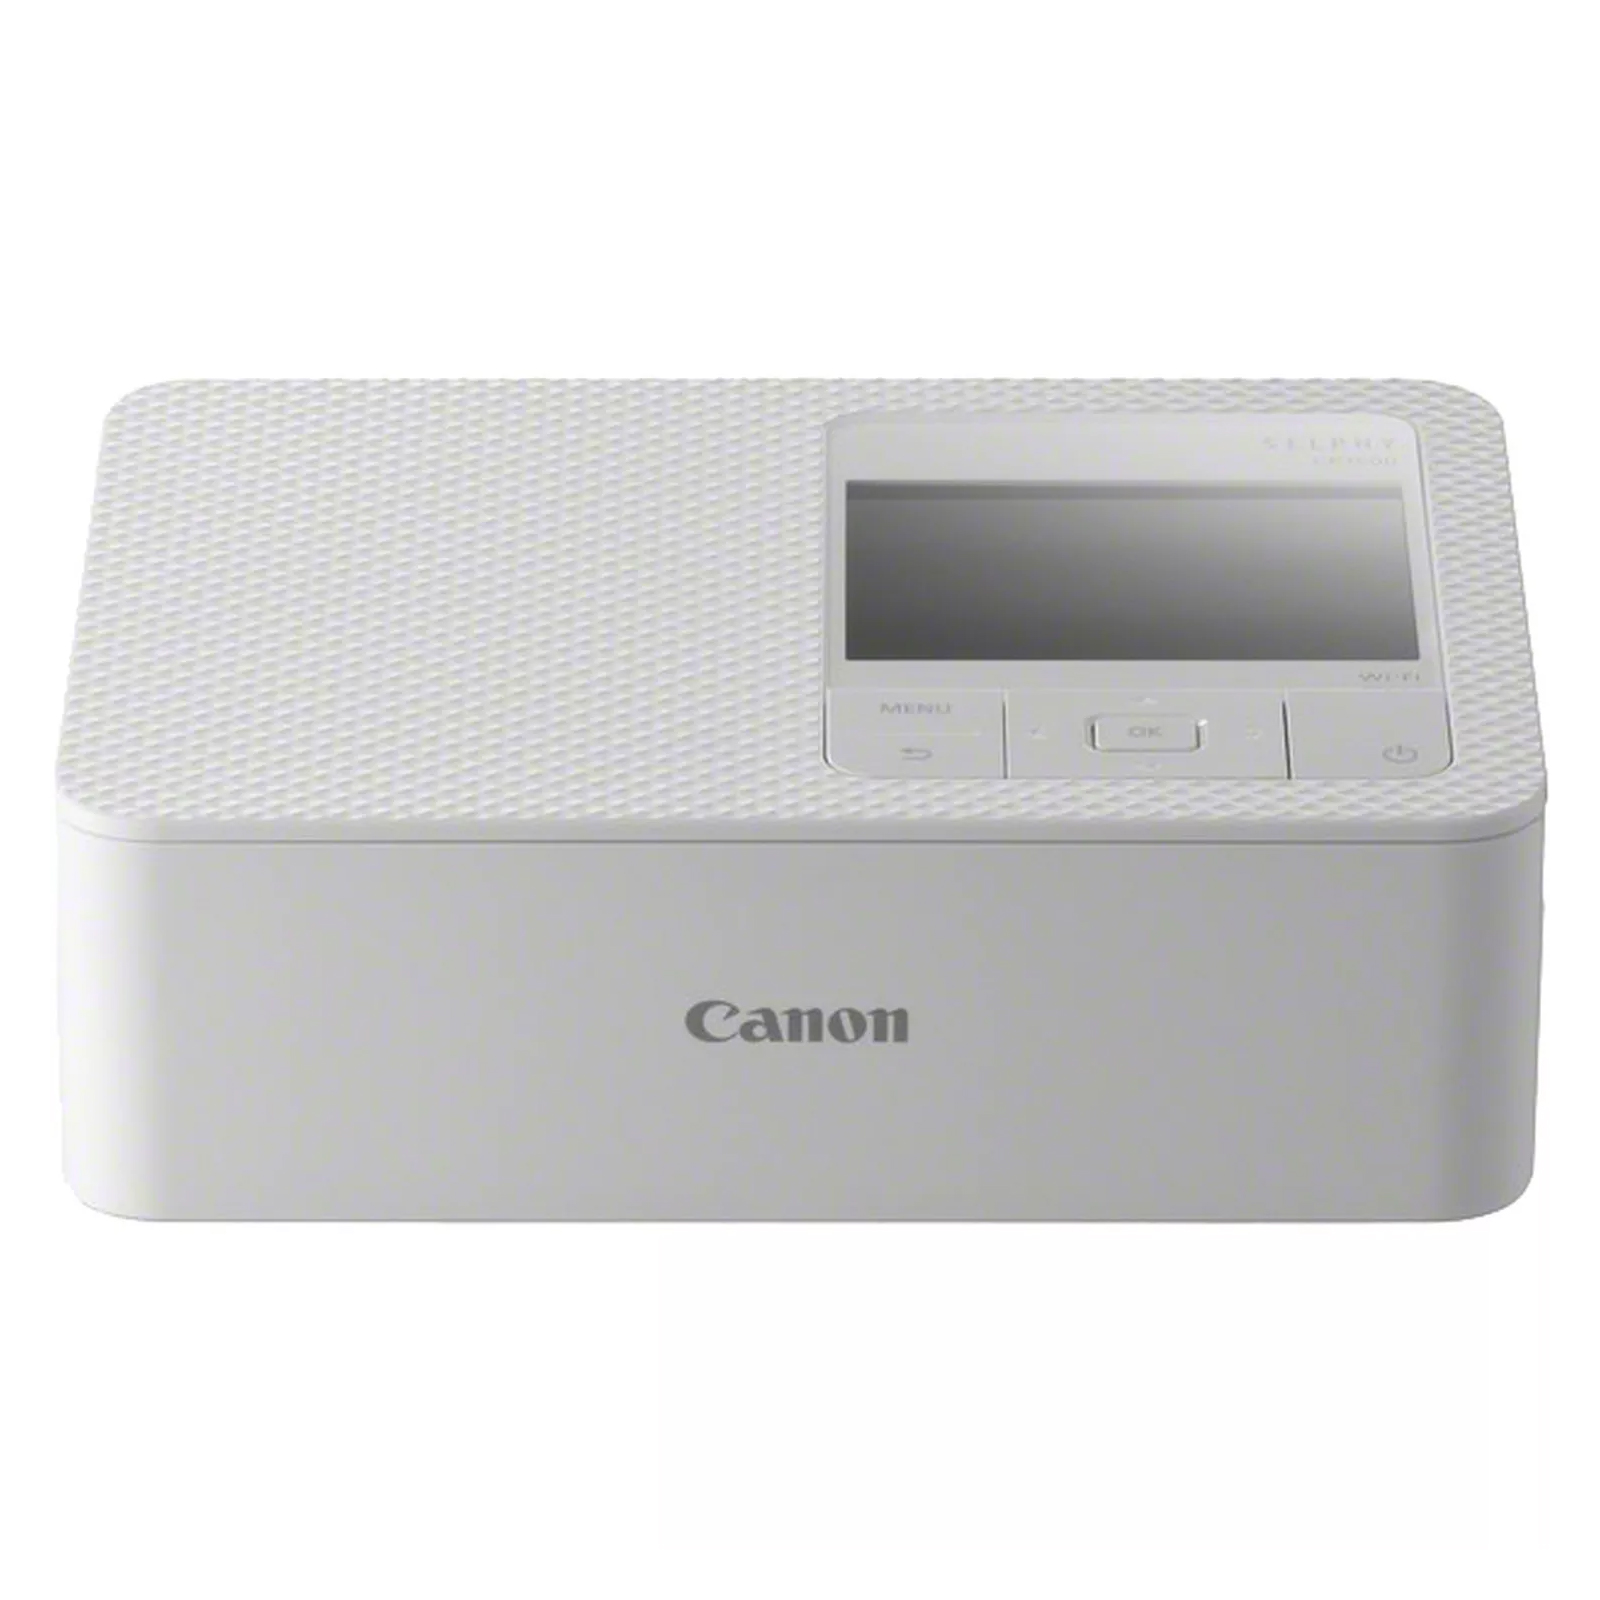 Image of Canon Selphy CP1500 Wireless Photo Printer White